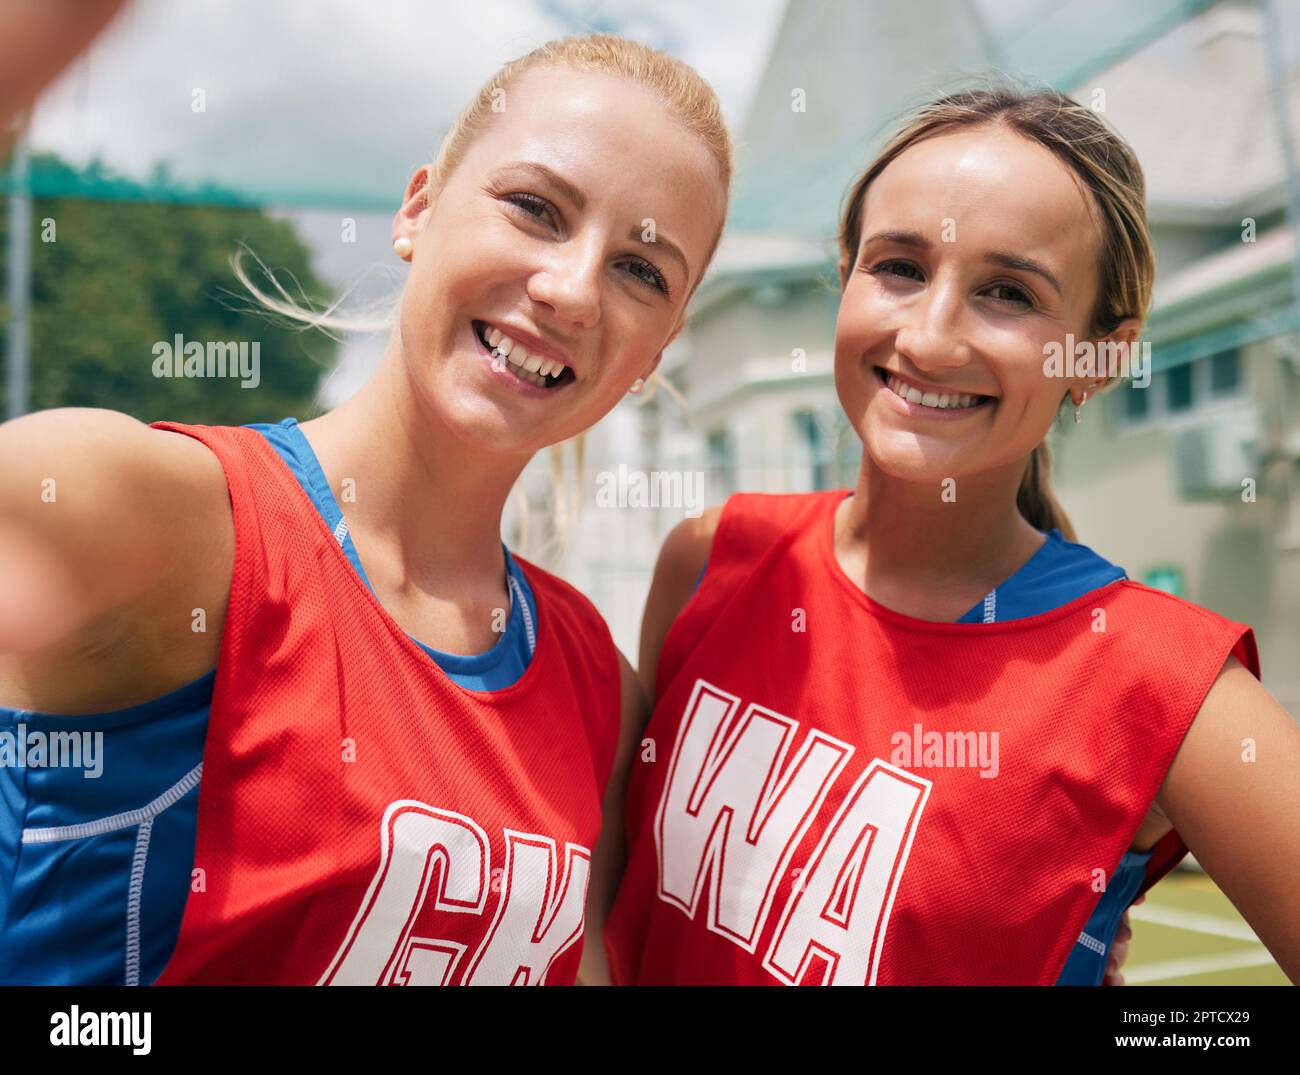 Selfie, sports and women team smile after a competition or game on netball court, field or outdoor park in Australia with cellphone for social media. Stock Photo